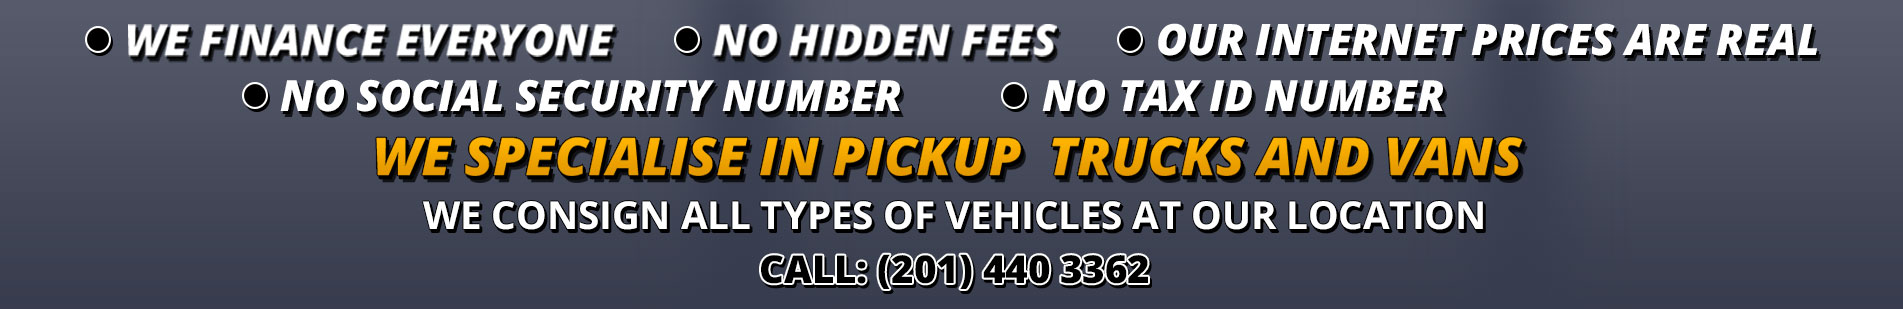 We Specialise in Pickup Trucks And Vans